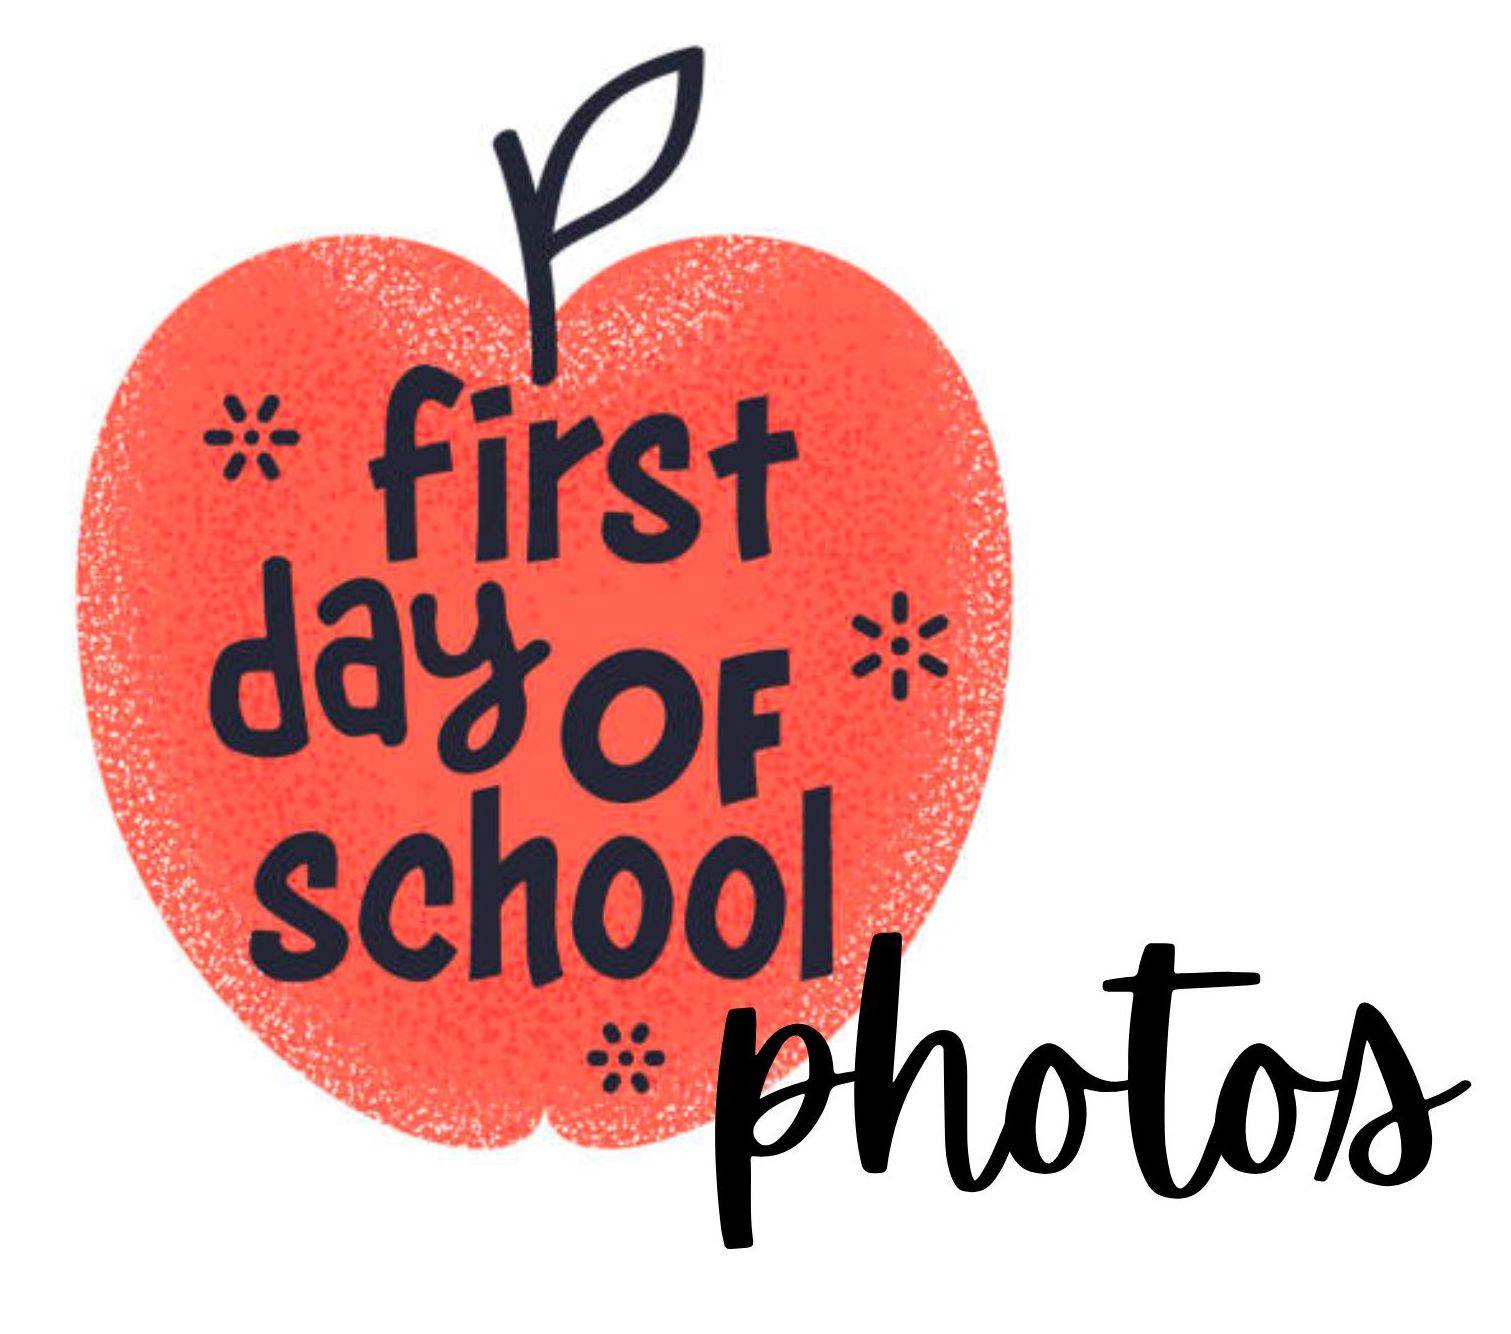 graphic of apple and text: first day of school photos